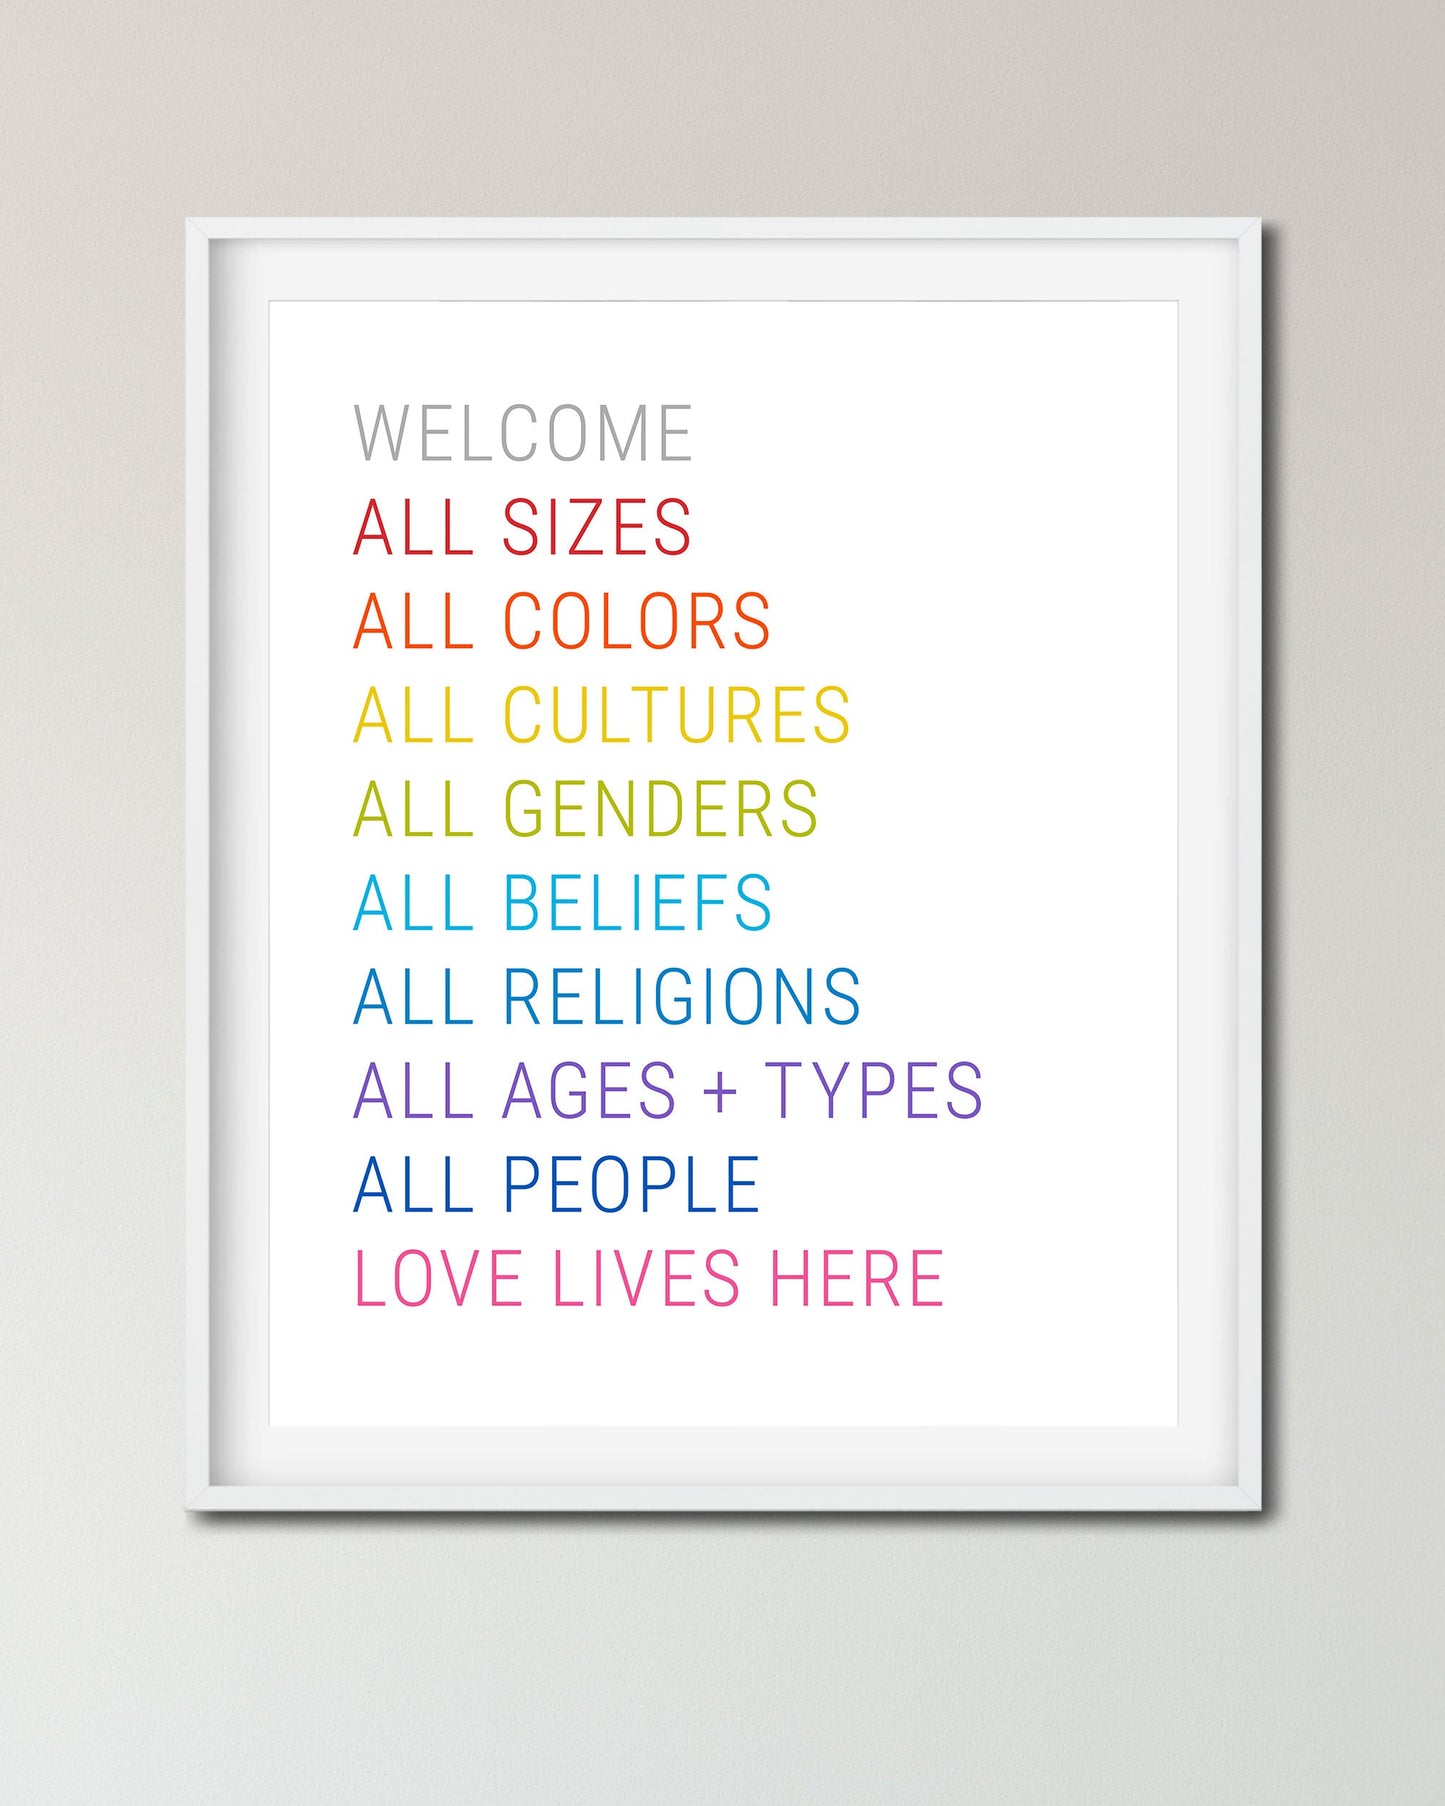 All Are Welcome Equality Print with rainbow colors - Transit Design